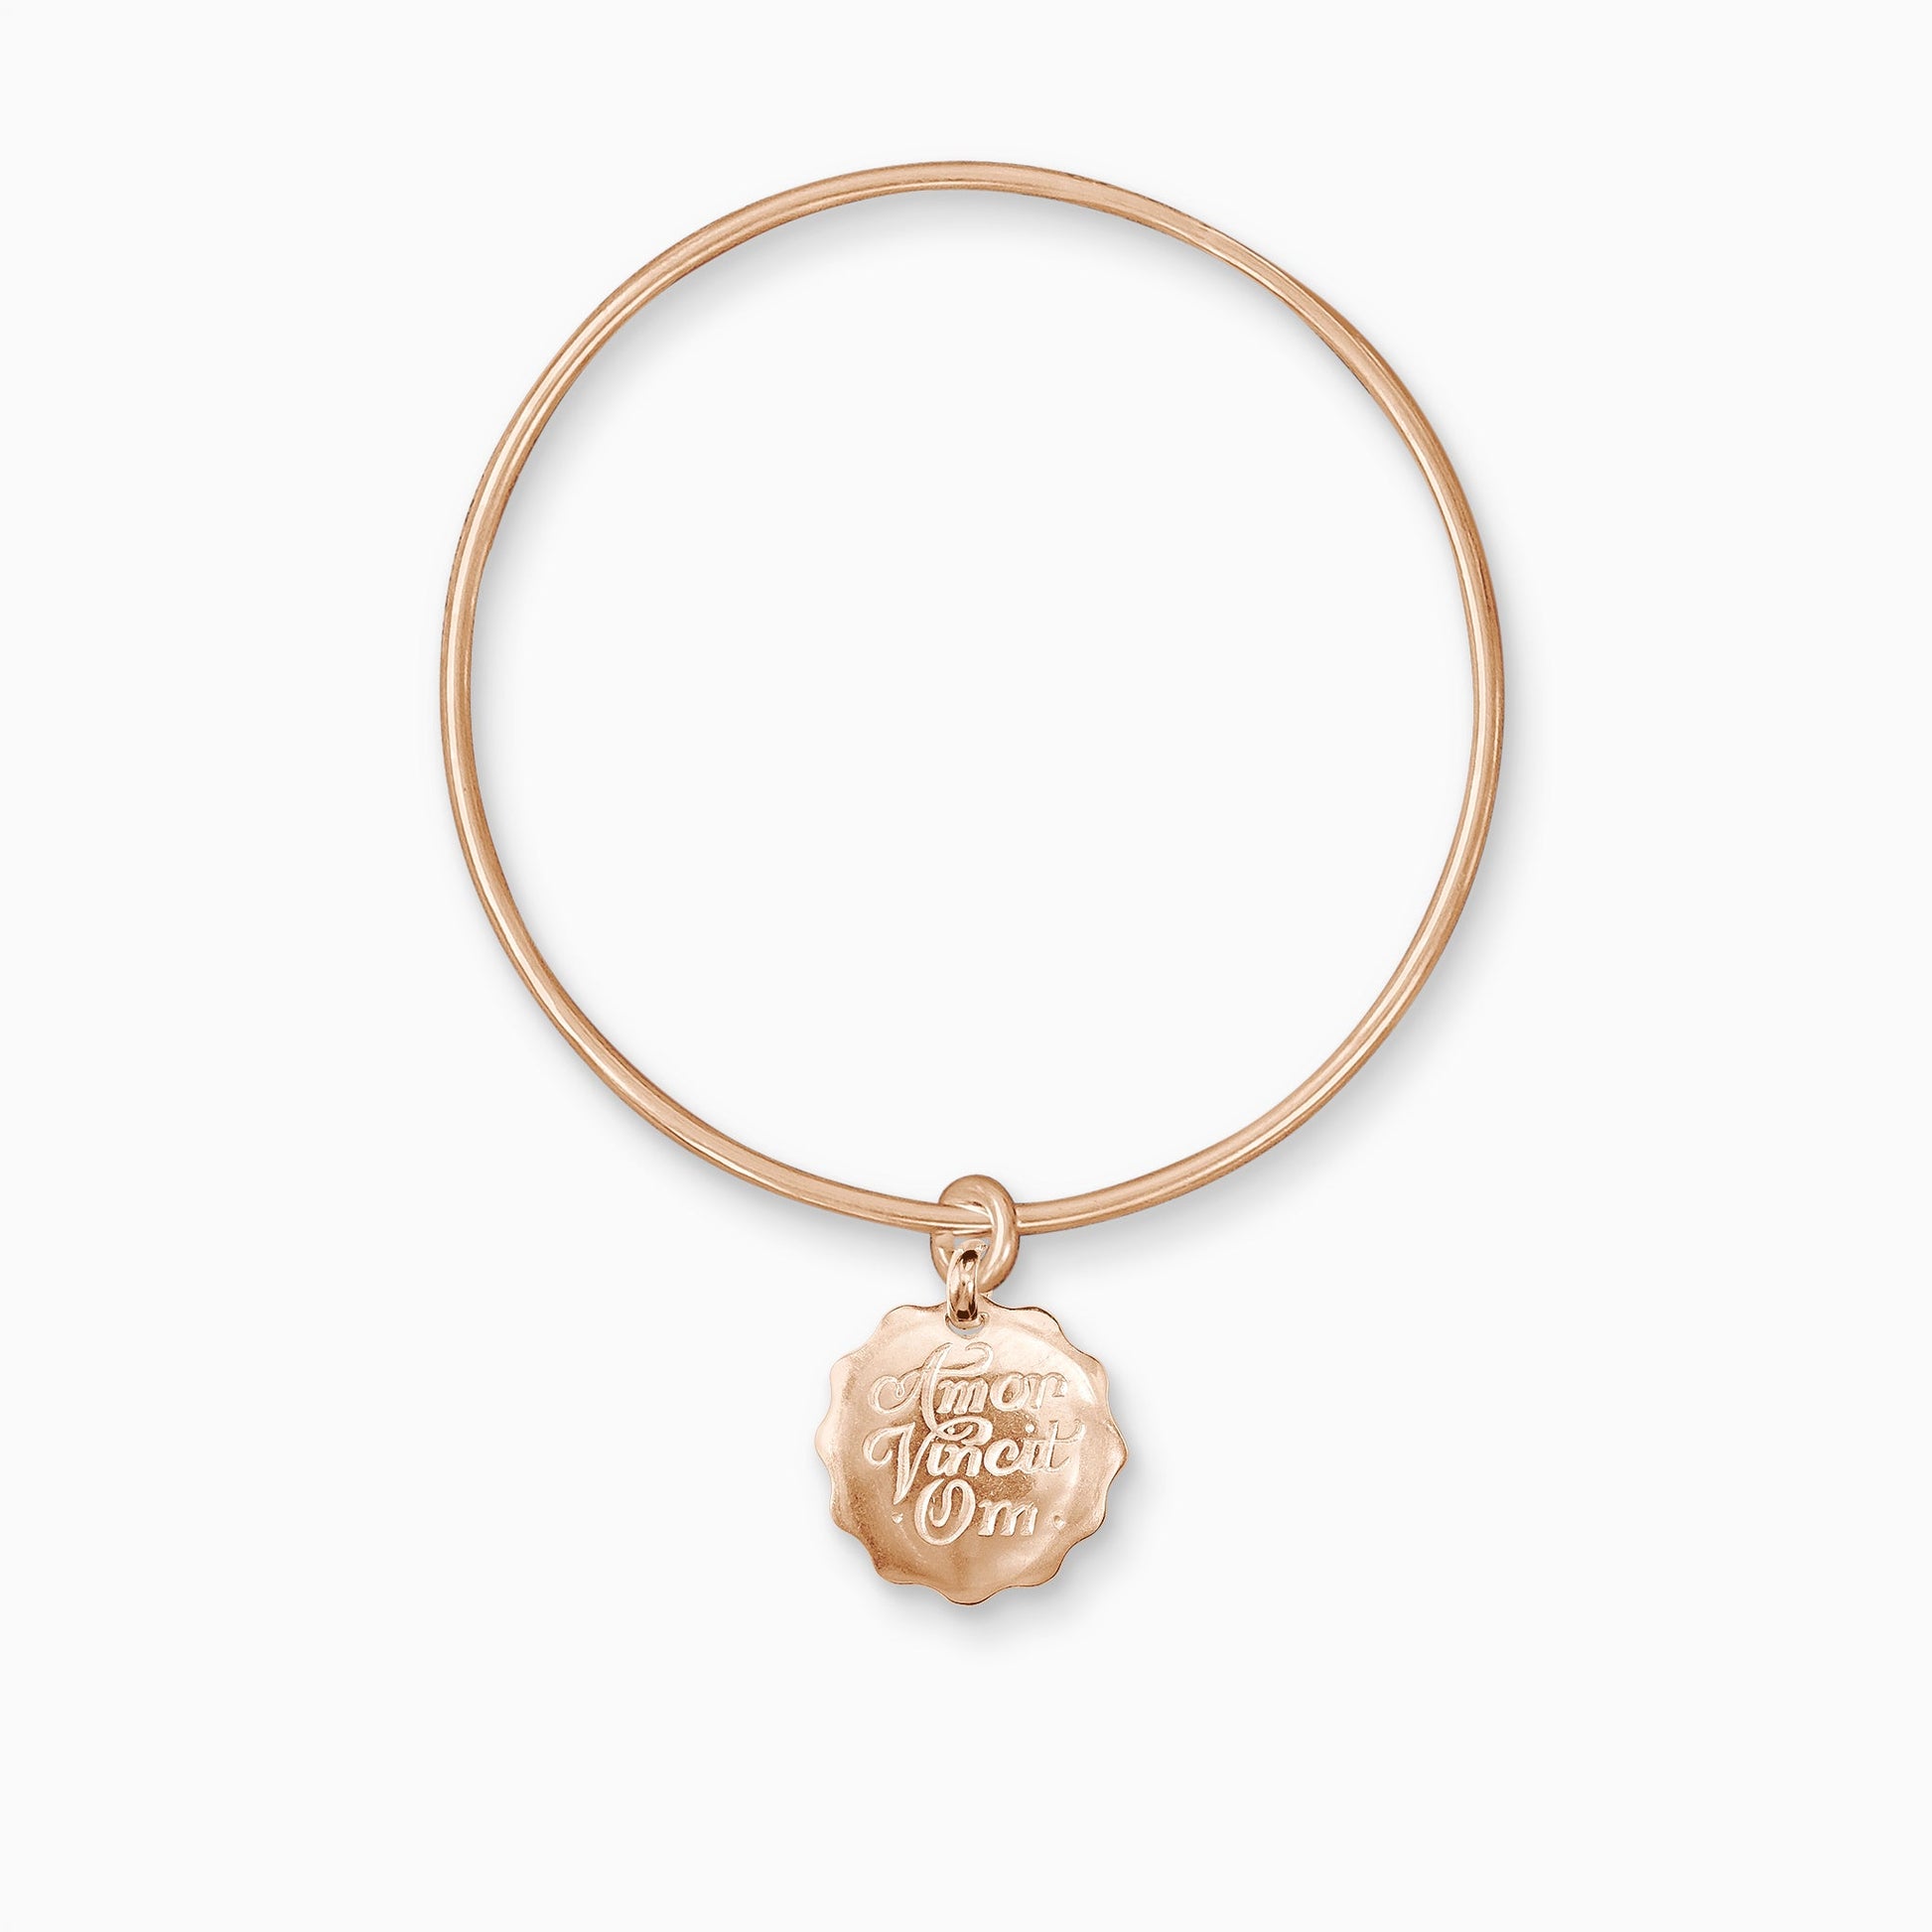 An 18ct Fairtrade rose gold round, smooth charm with a wavy edge engraved with ‘Love Conquers All’ in Latin, freely moving on a round wire bangle.  Charm 22mm. Bangle, 63mm inside diameter x 2mm round wire.